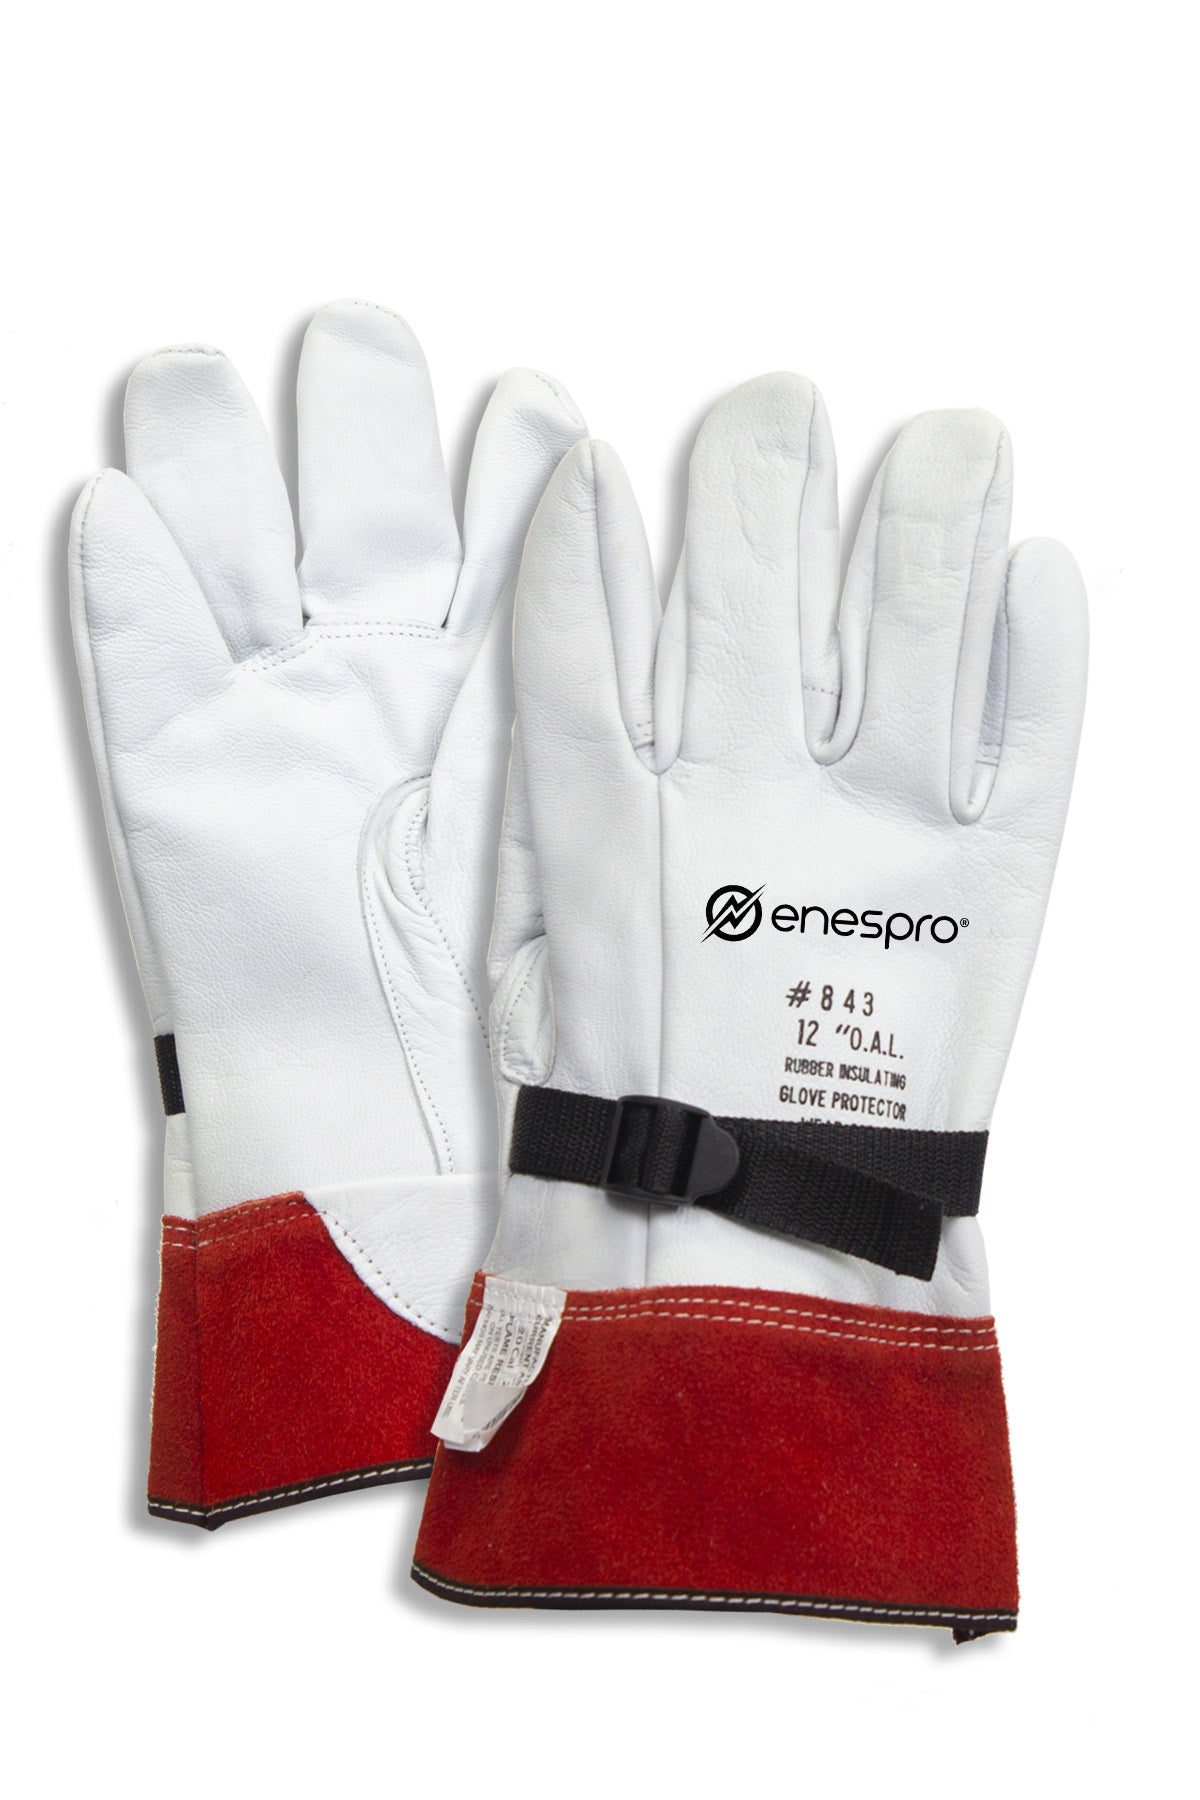 Enespro 12" Leather Glove Protectors